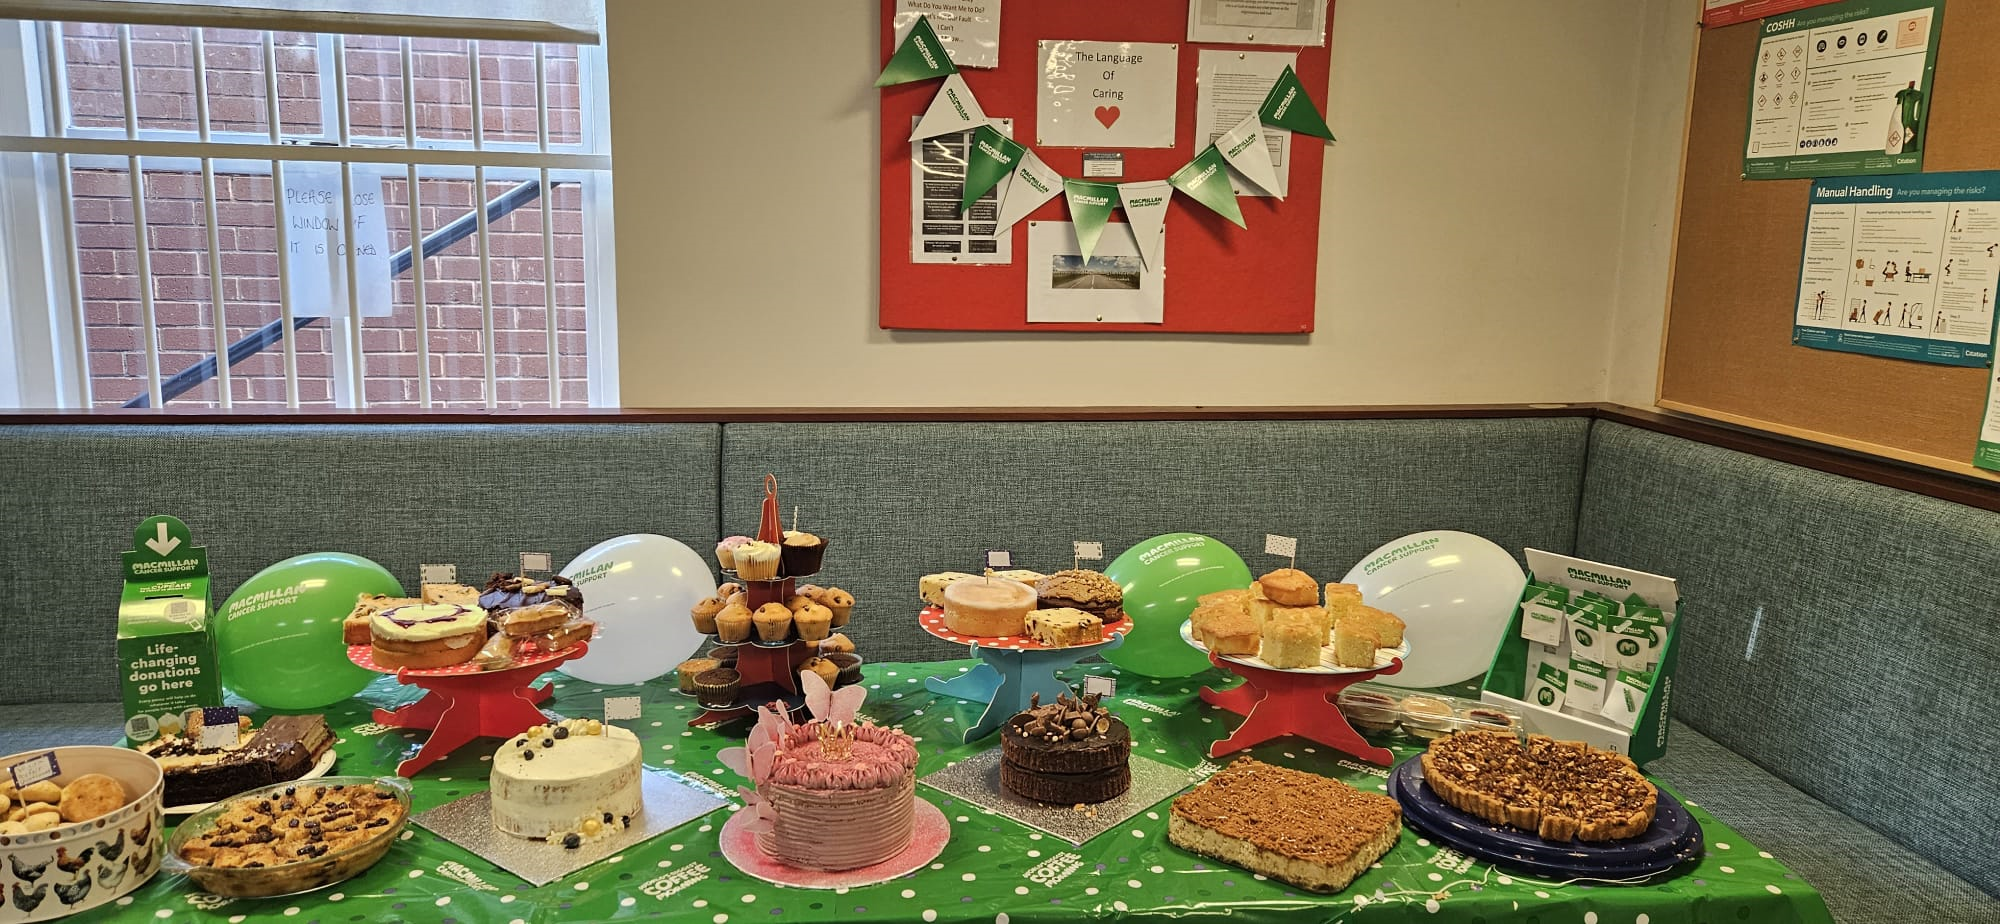 Table with the Macmillan Cakes